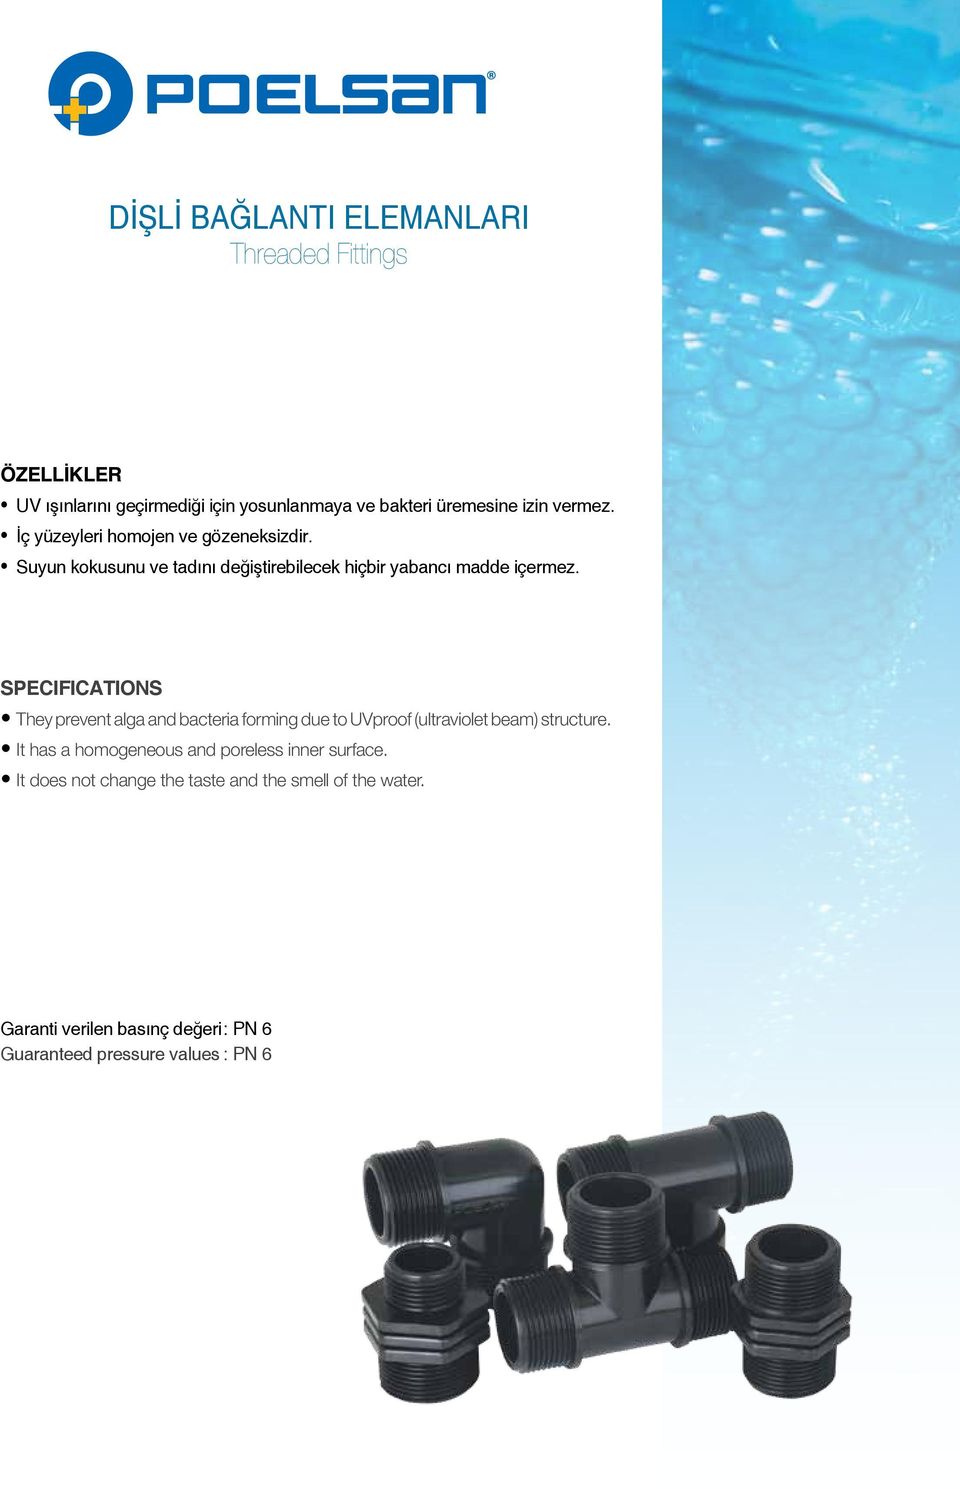 SpecIfIcatIons They prevent alga an bacteria forming ue to UVproof (ultraviolet beam) structure.